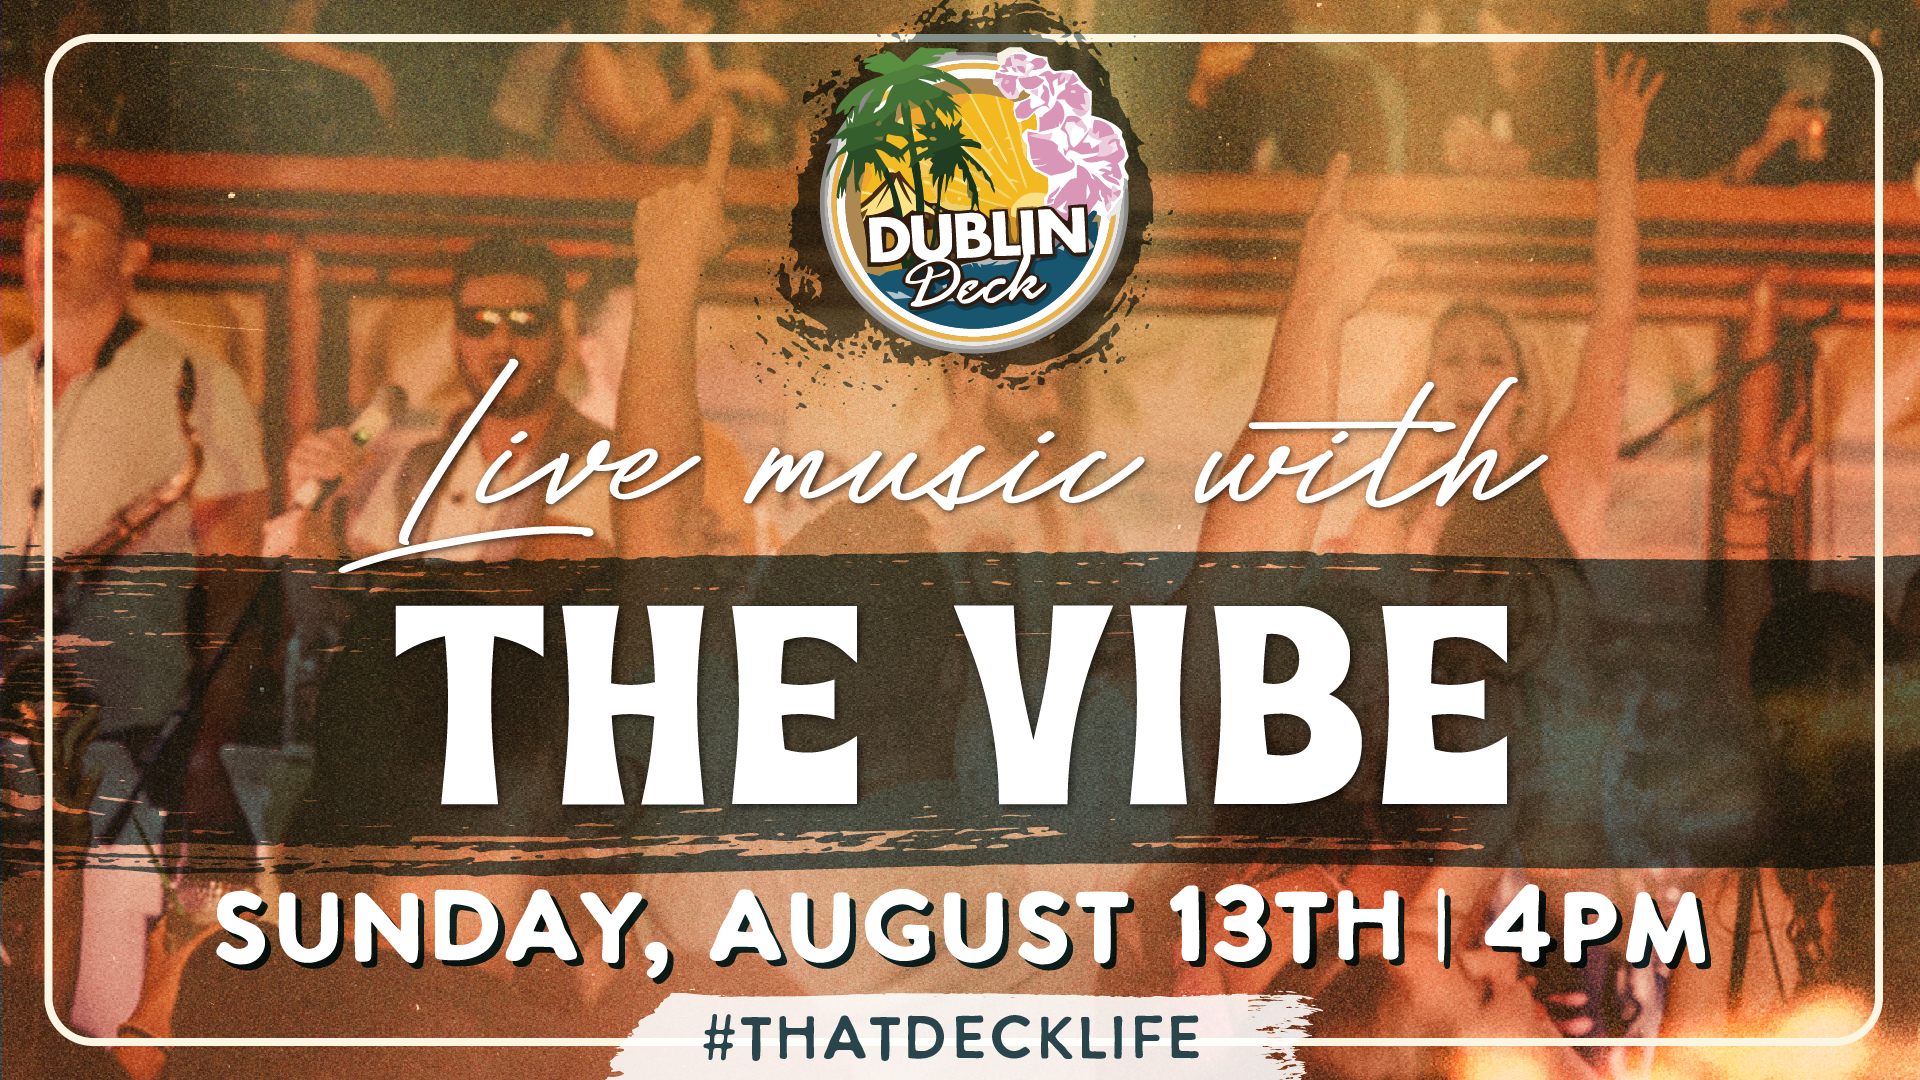 Don't let your weekend come to an end with stopping by for The Vibe! Music begins at 4PM